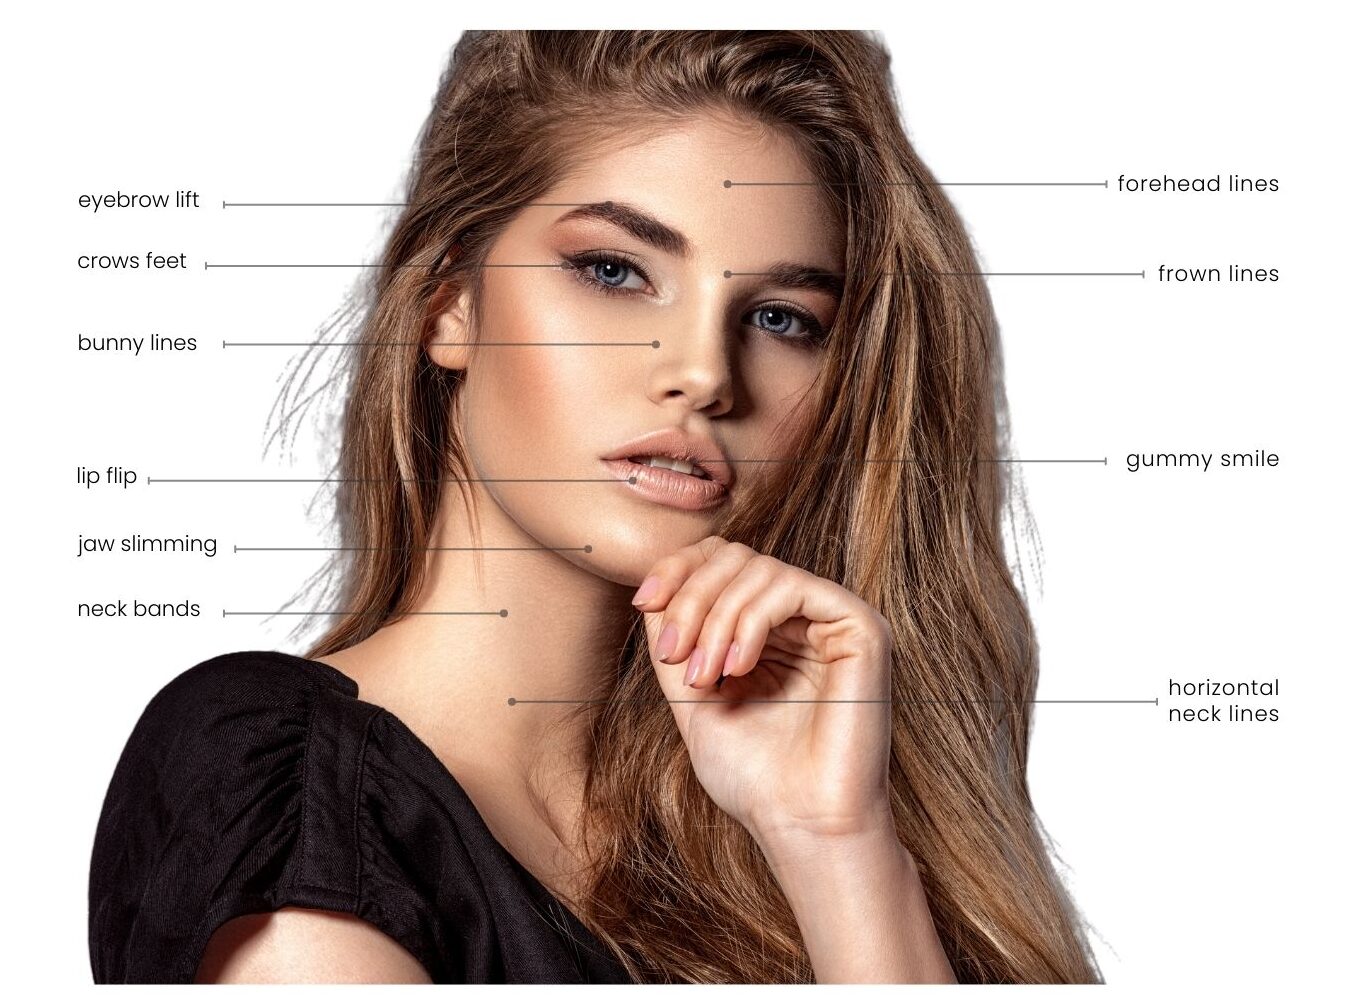 Woman with flawless and youthful appearance models the treatable areas with botox cosmetic injectables in Westport, CT.